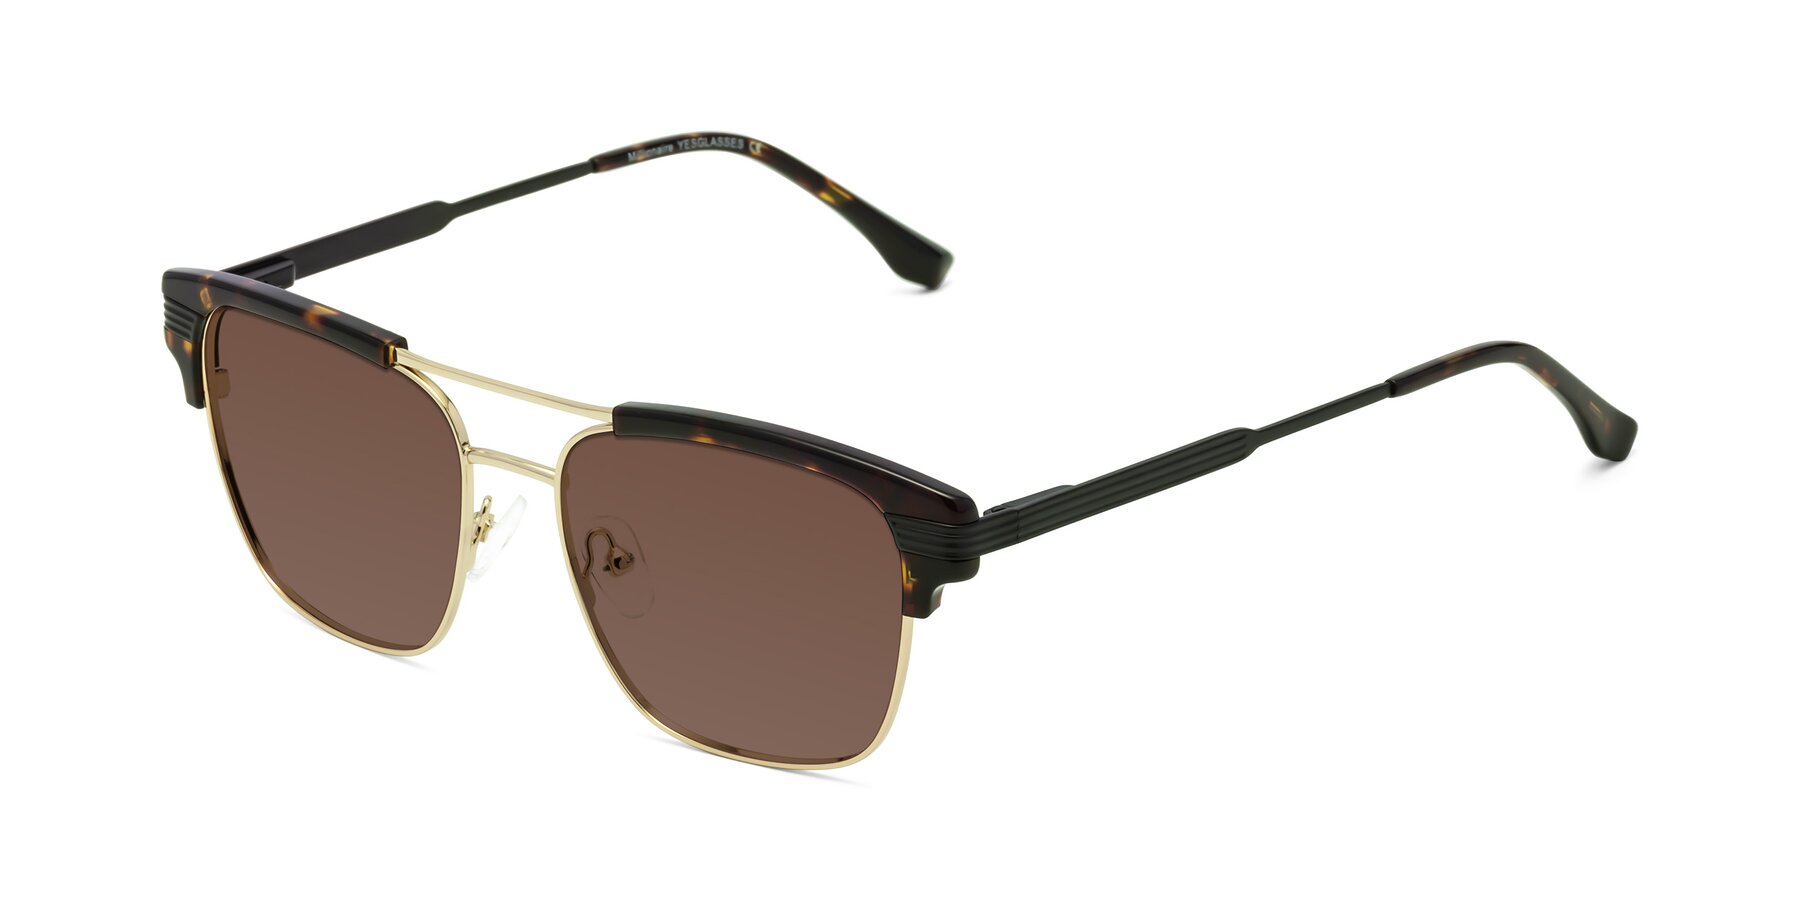 Angle of Millionaire in Tortoise-Gold with Brown Tinted Lenses